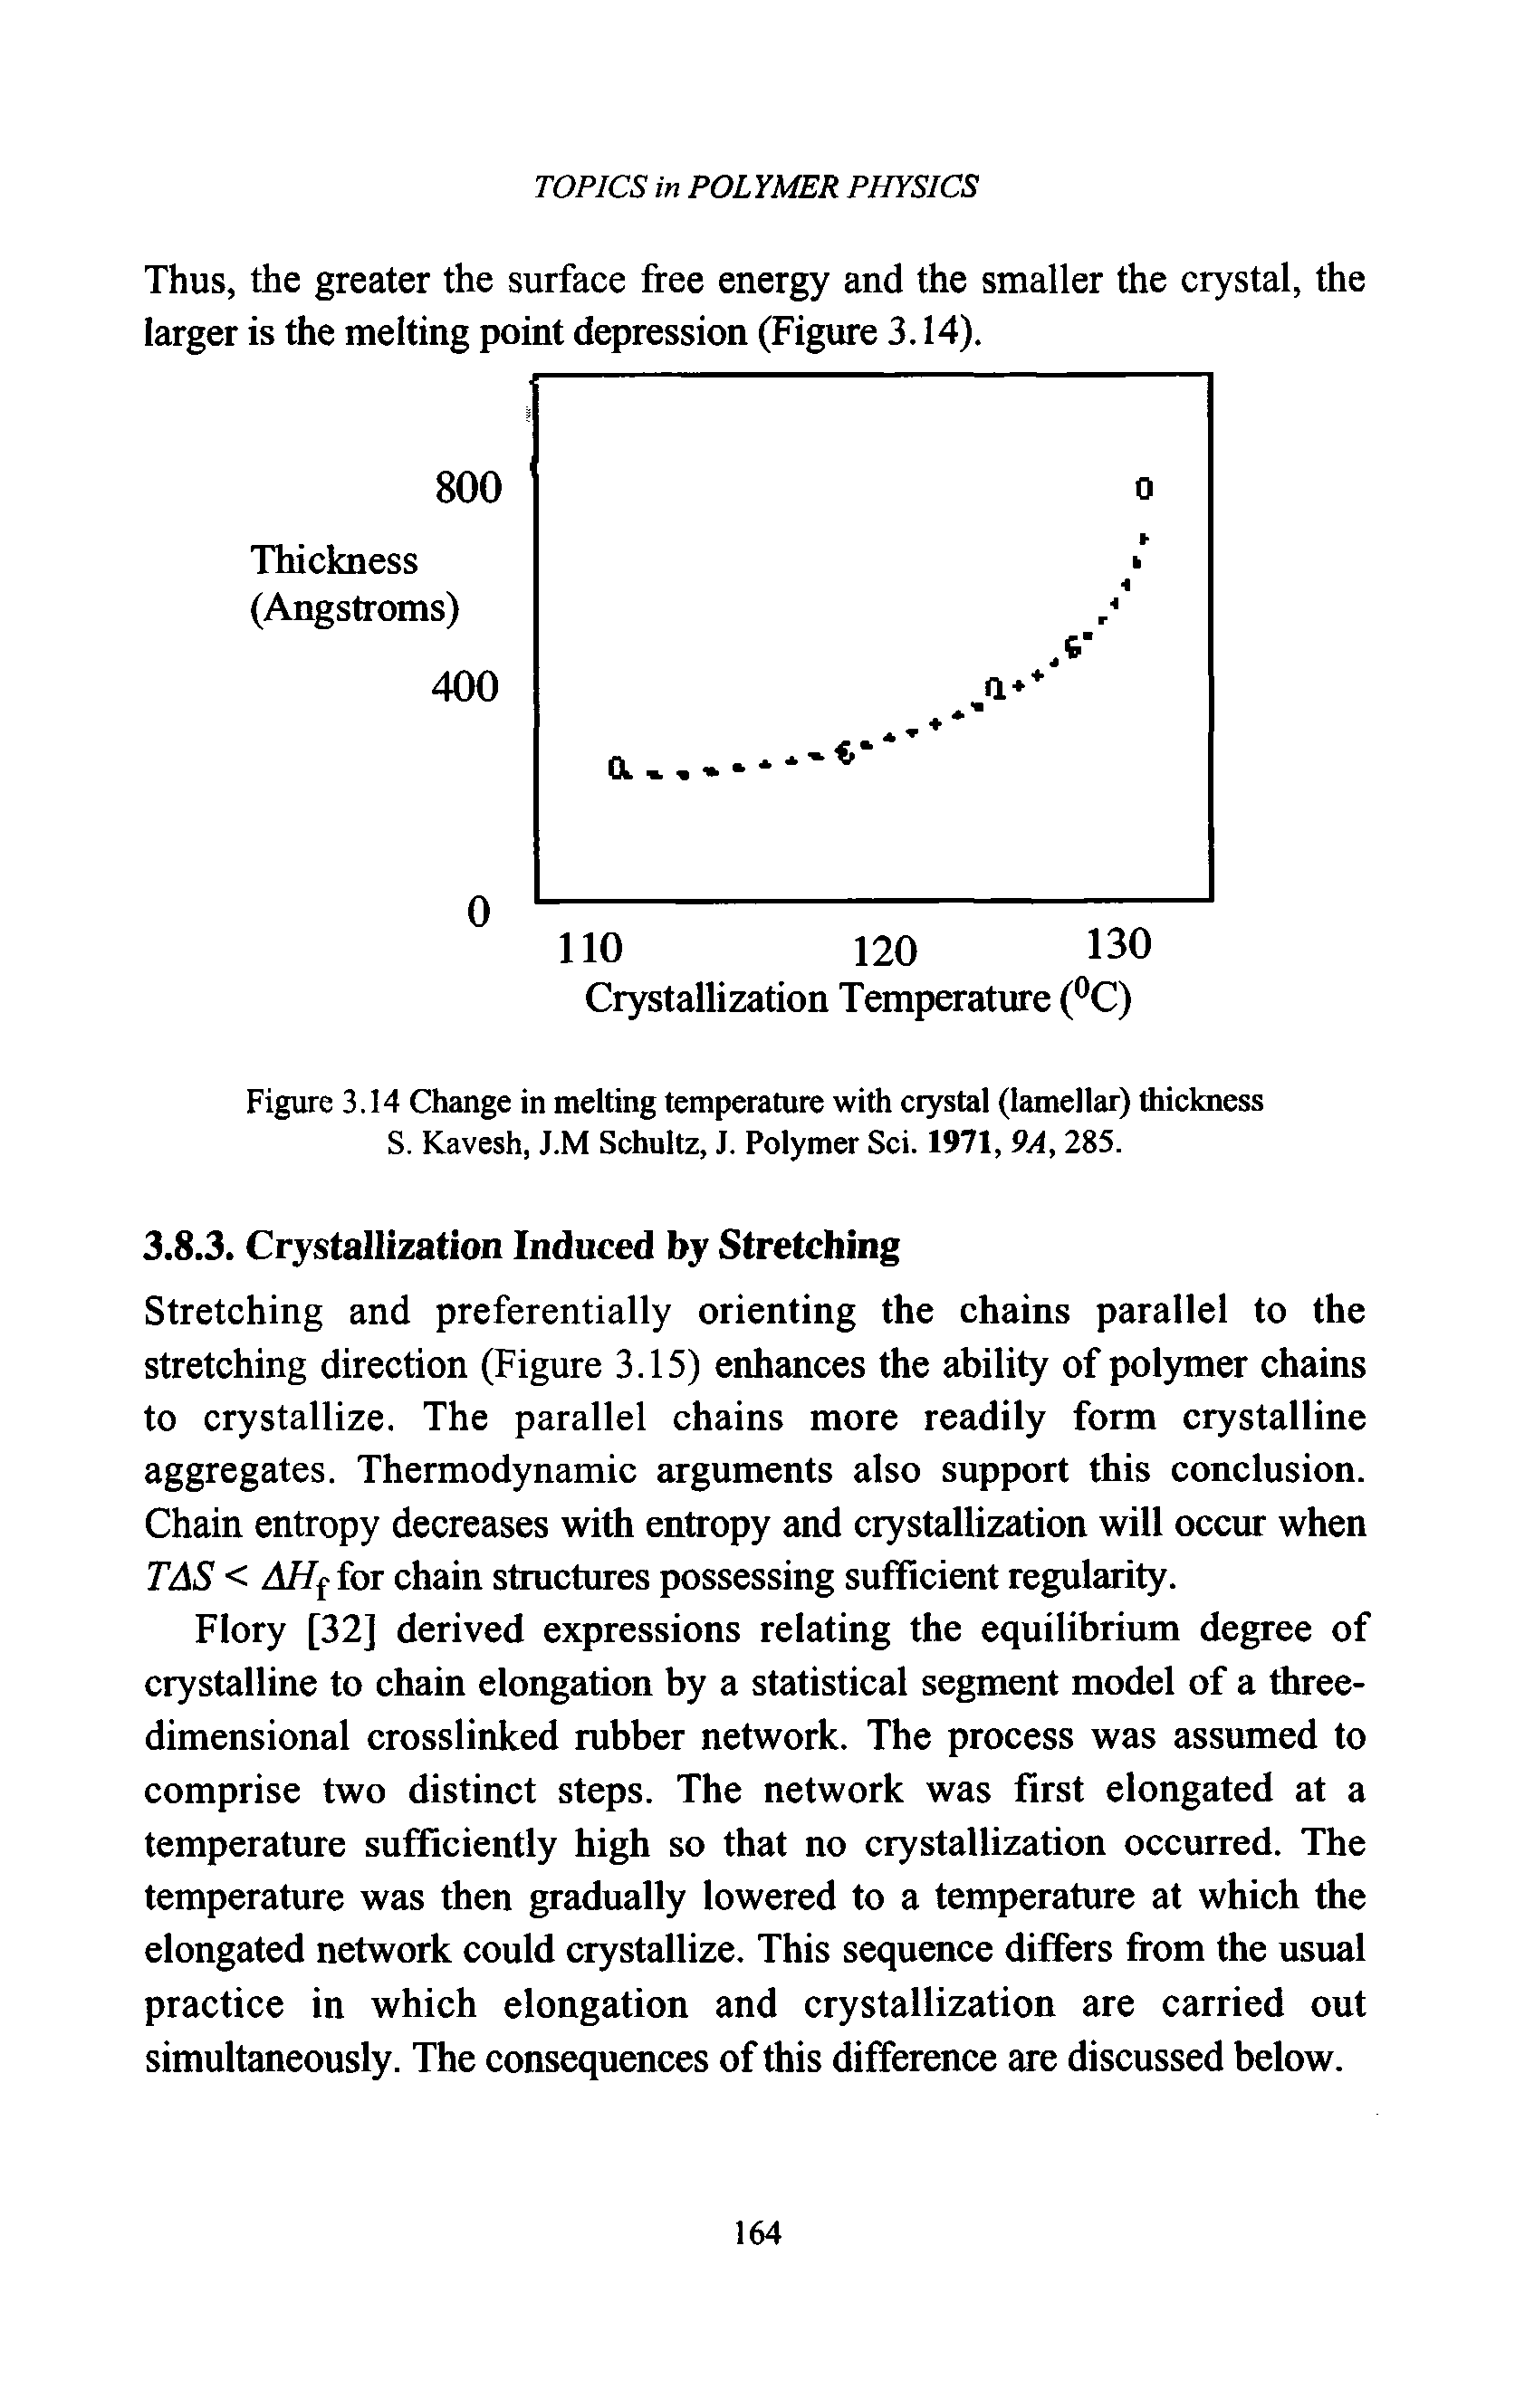 Figure 3.14 Change in melting temperature with crystal (lamellar) thickness S. Kavesh, J.M Schultz, J. Polymer Sci. 1971, 9A, 285.